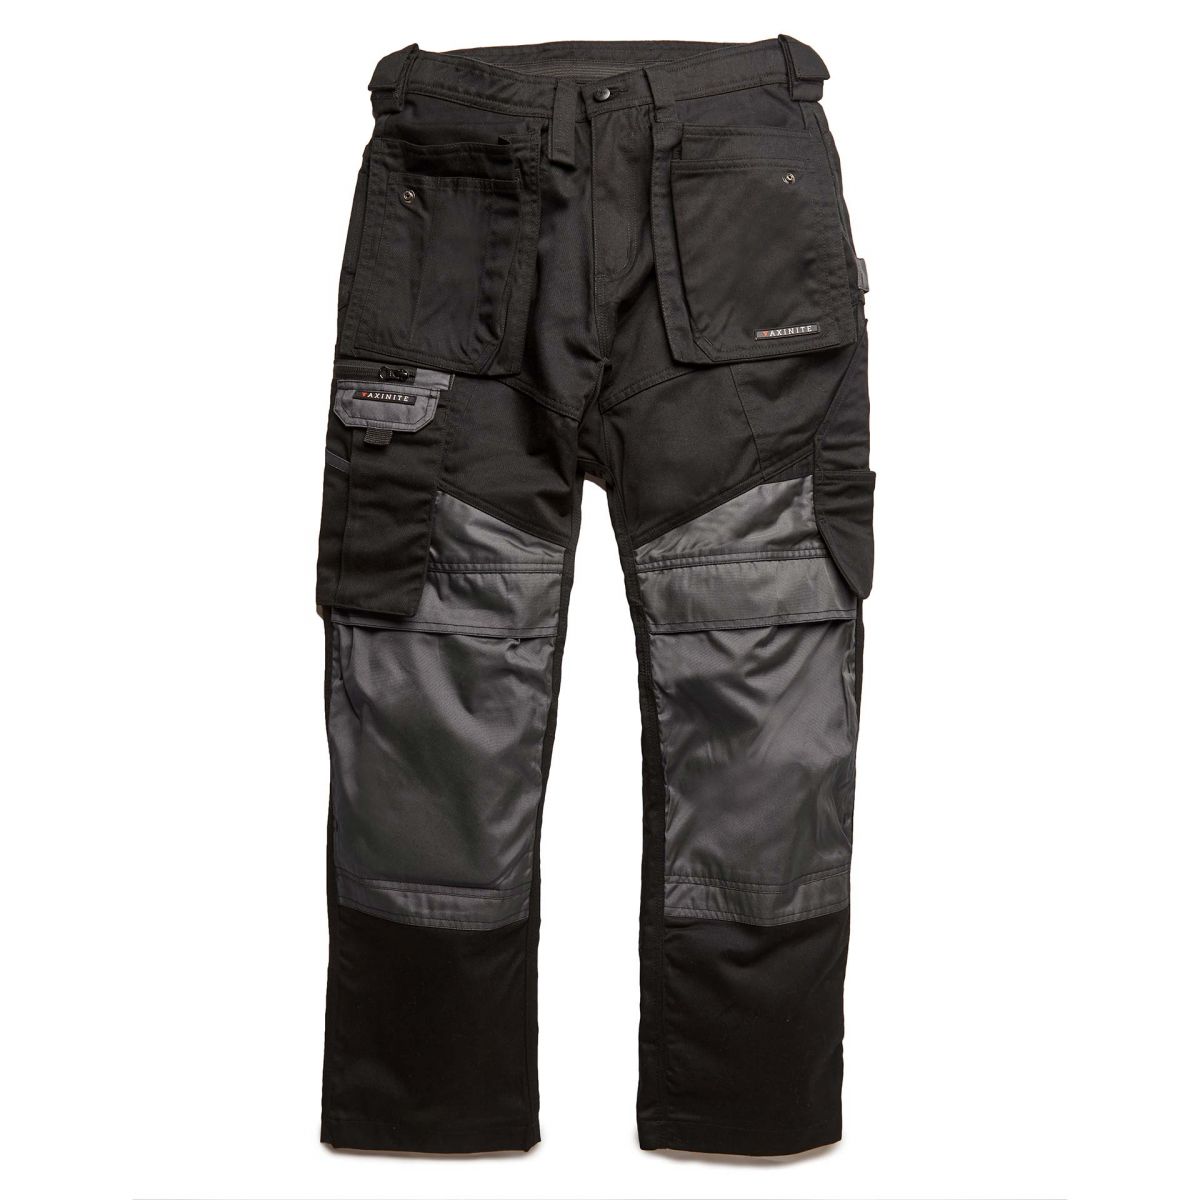 View Axinite AX39 Workwear Trousers Black 32R information